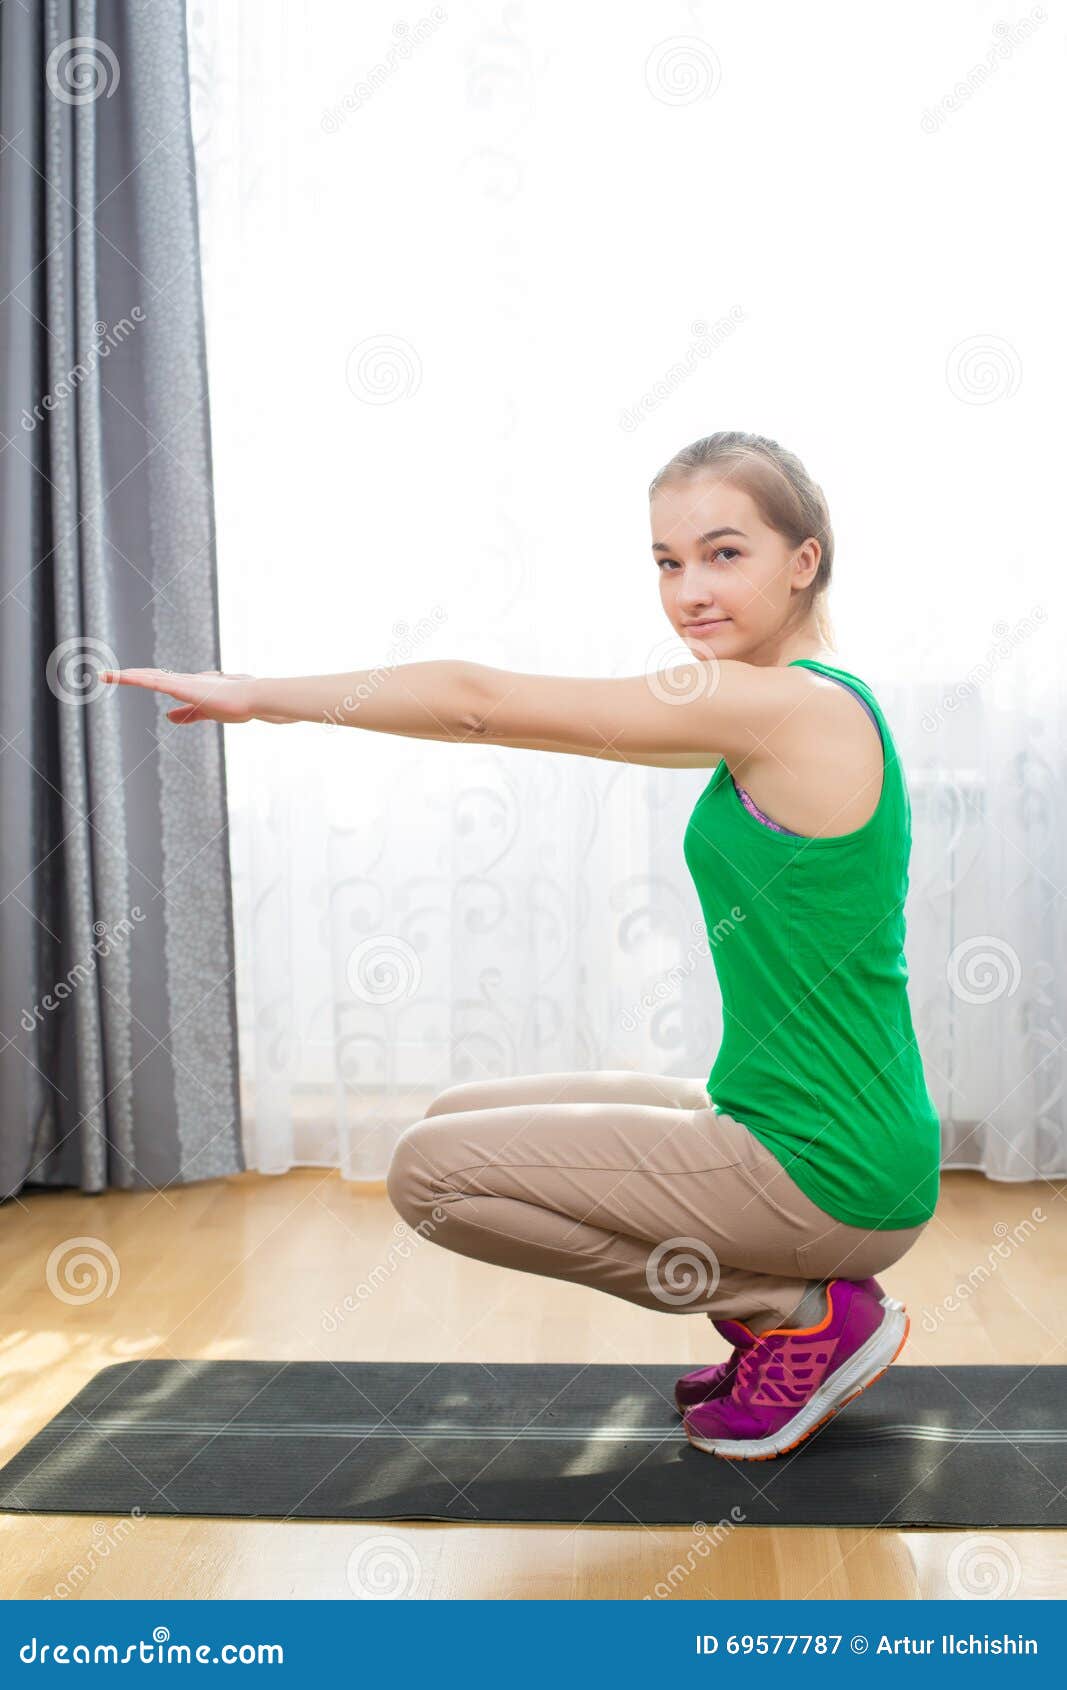 Slim Girl Doing Squats on Yoga Mat at Home Stock Image - Image of ...